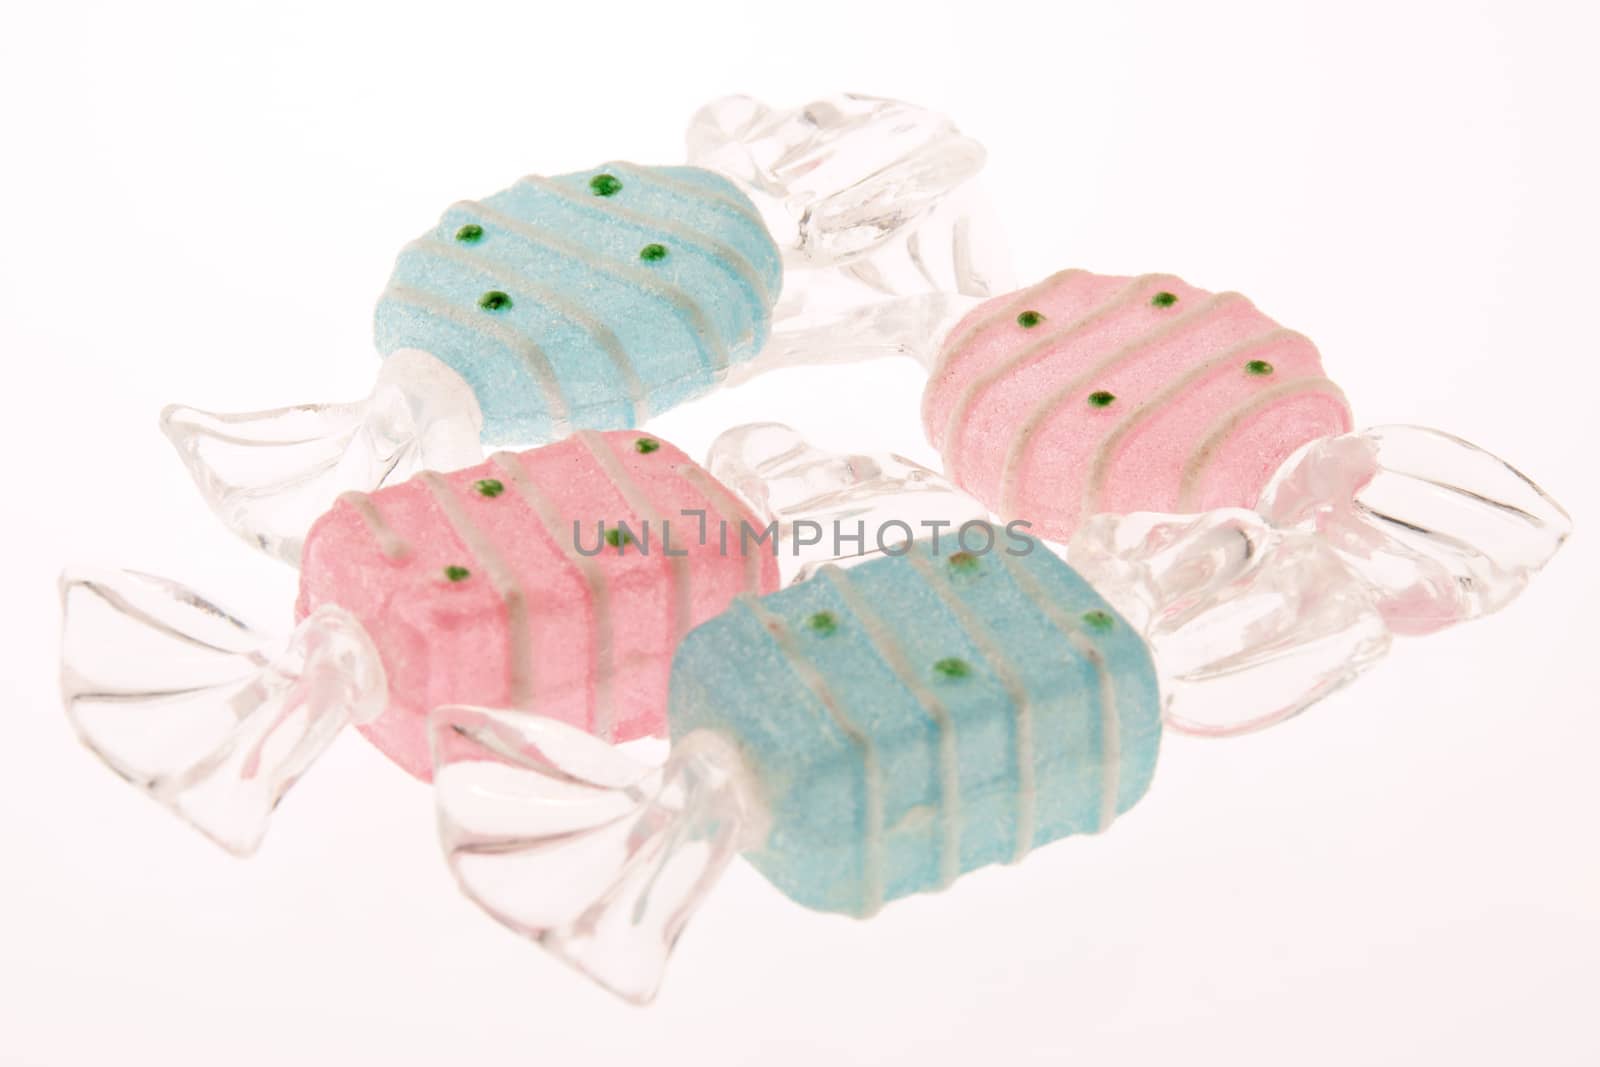 Cyan and pink plastic candy shaped Christmas ornaments over white background. Selective focus. Shallow DOF.